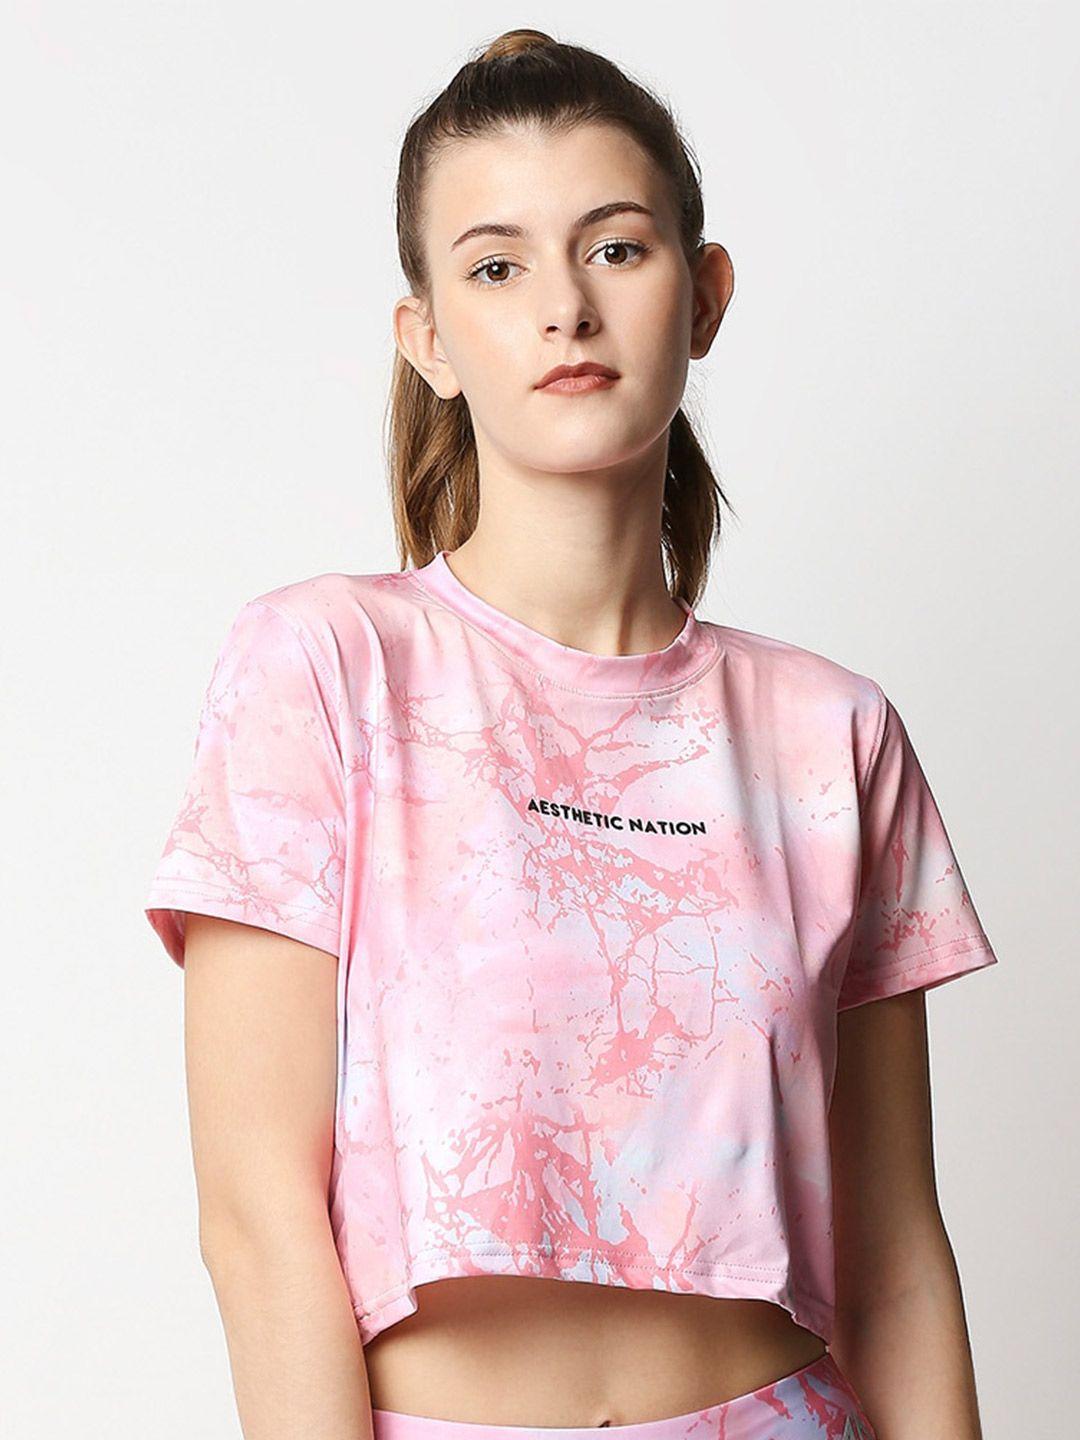 aesthetic nation women pink & white tie and dye printed antimicrobial boxy t-shirt